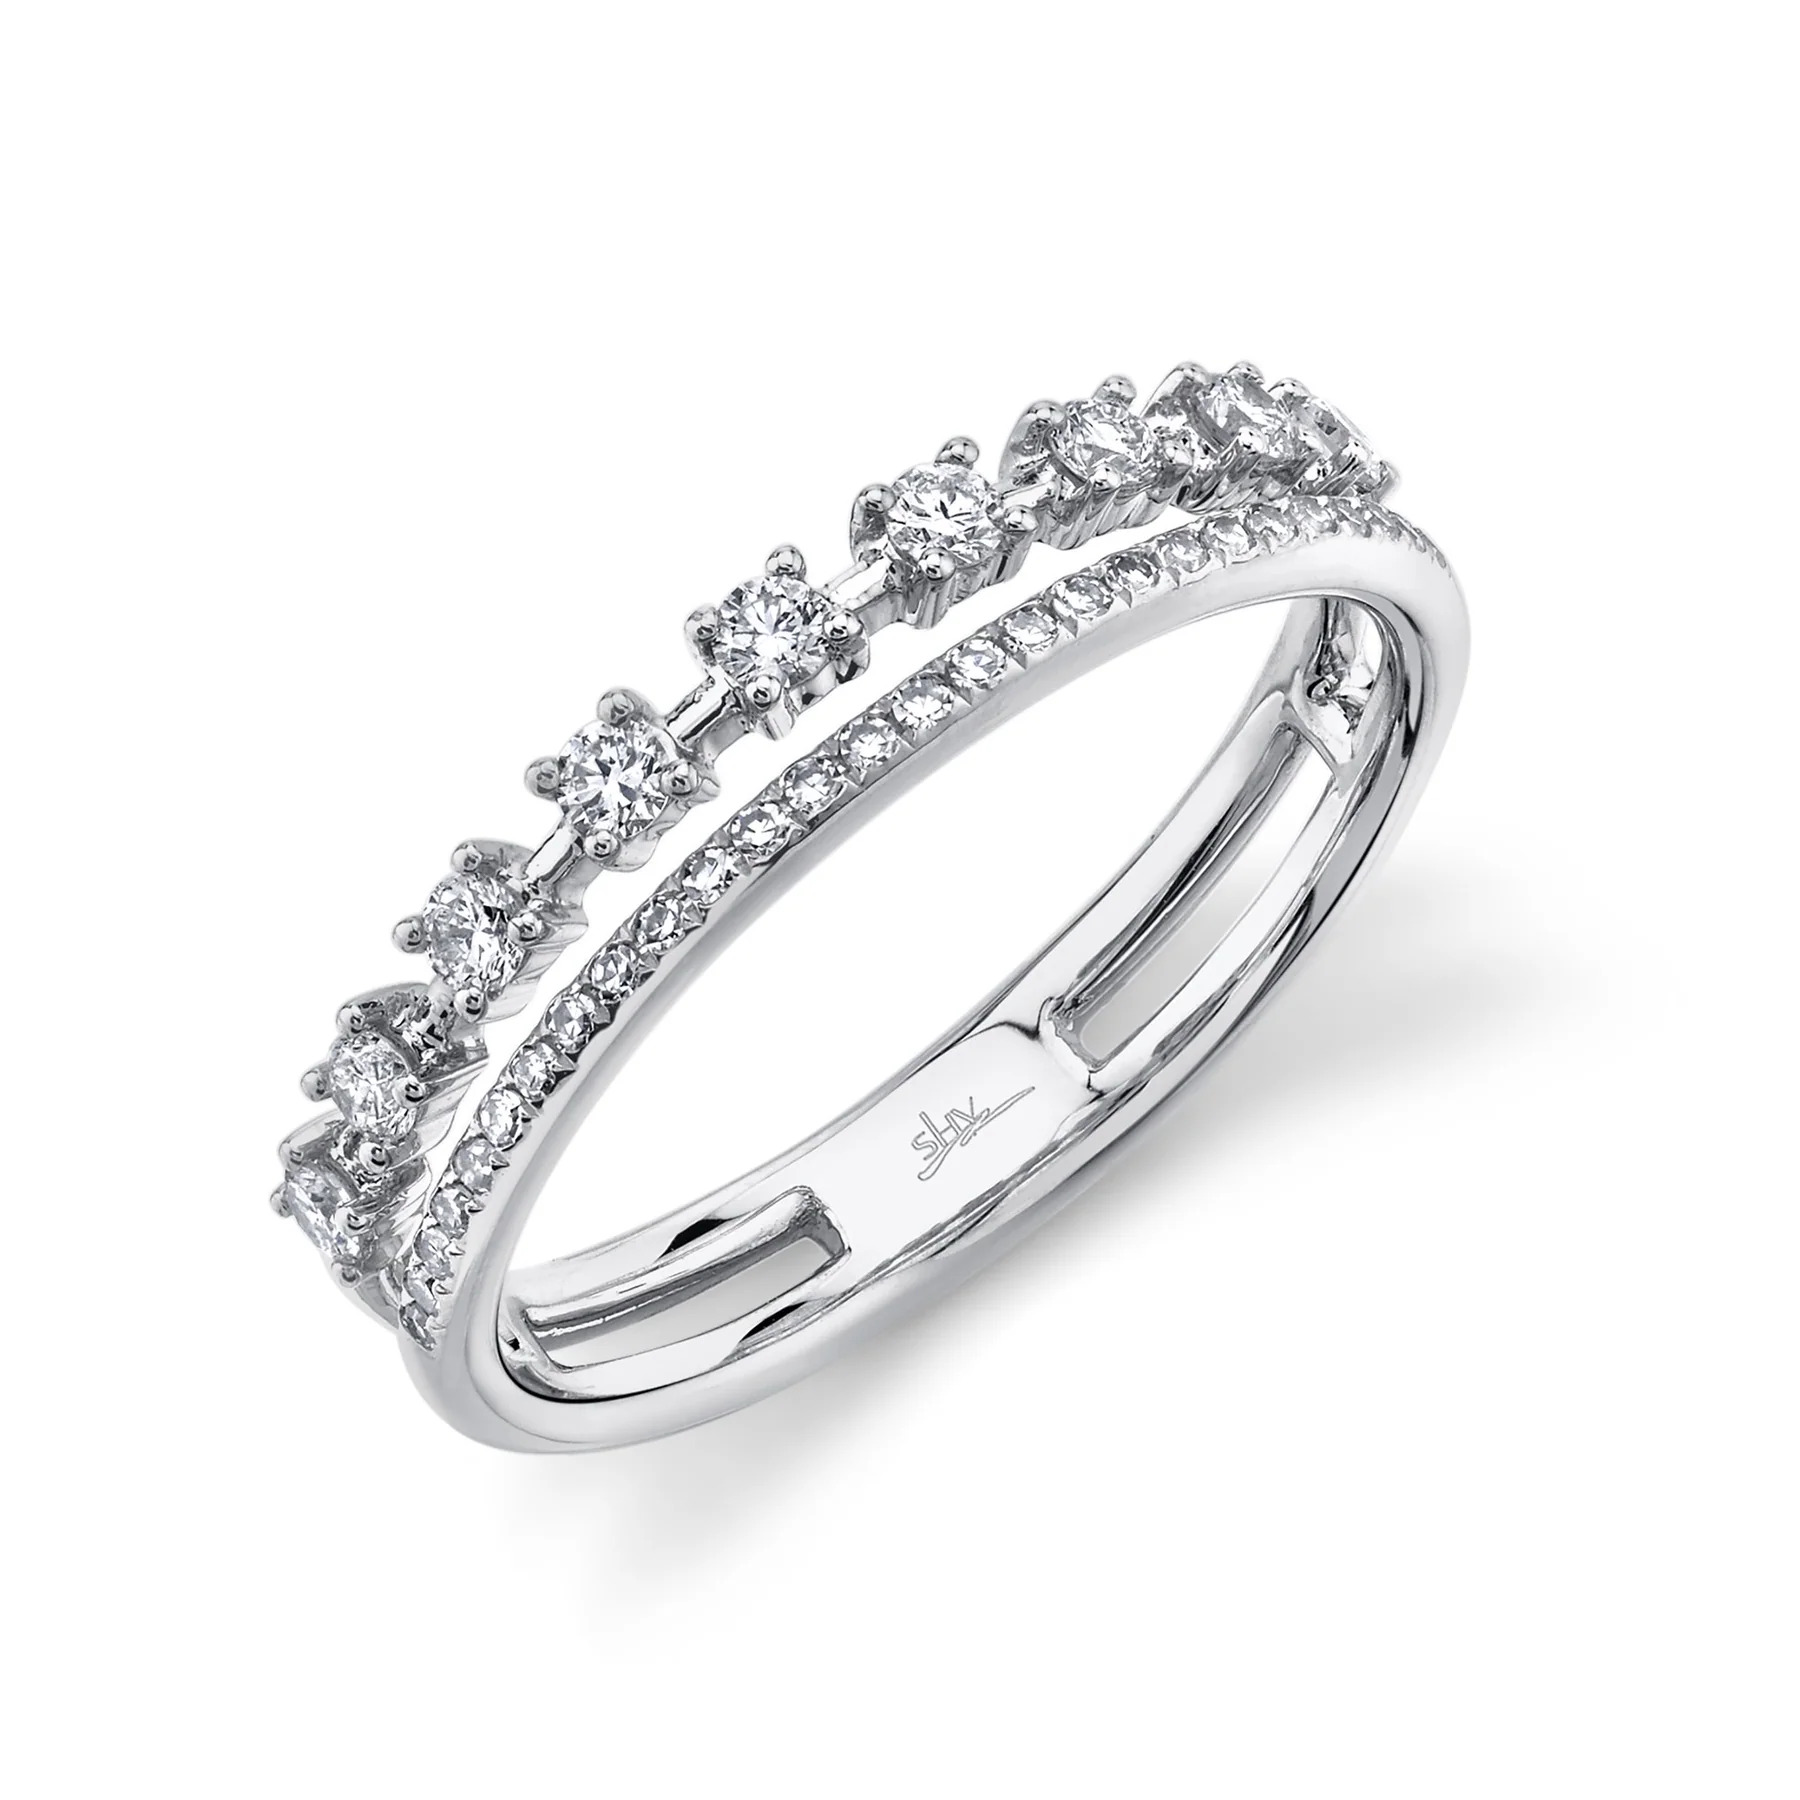 One white gold ring is positioned slanted toward the camera. The ring showcases a double-row design, giving the illusion of two diamond bands. The first row features diamonds set in prongs, spaced out along the band. The second row of the ring is encrusted with diamonds.